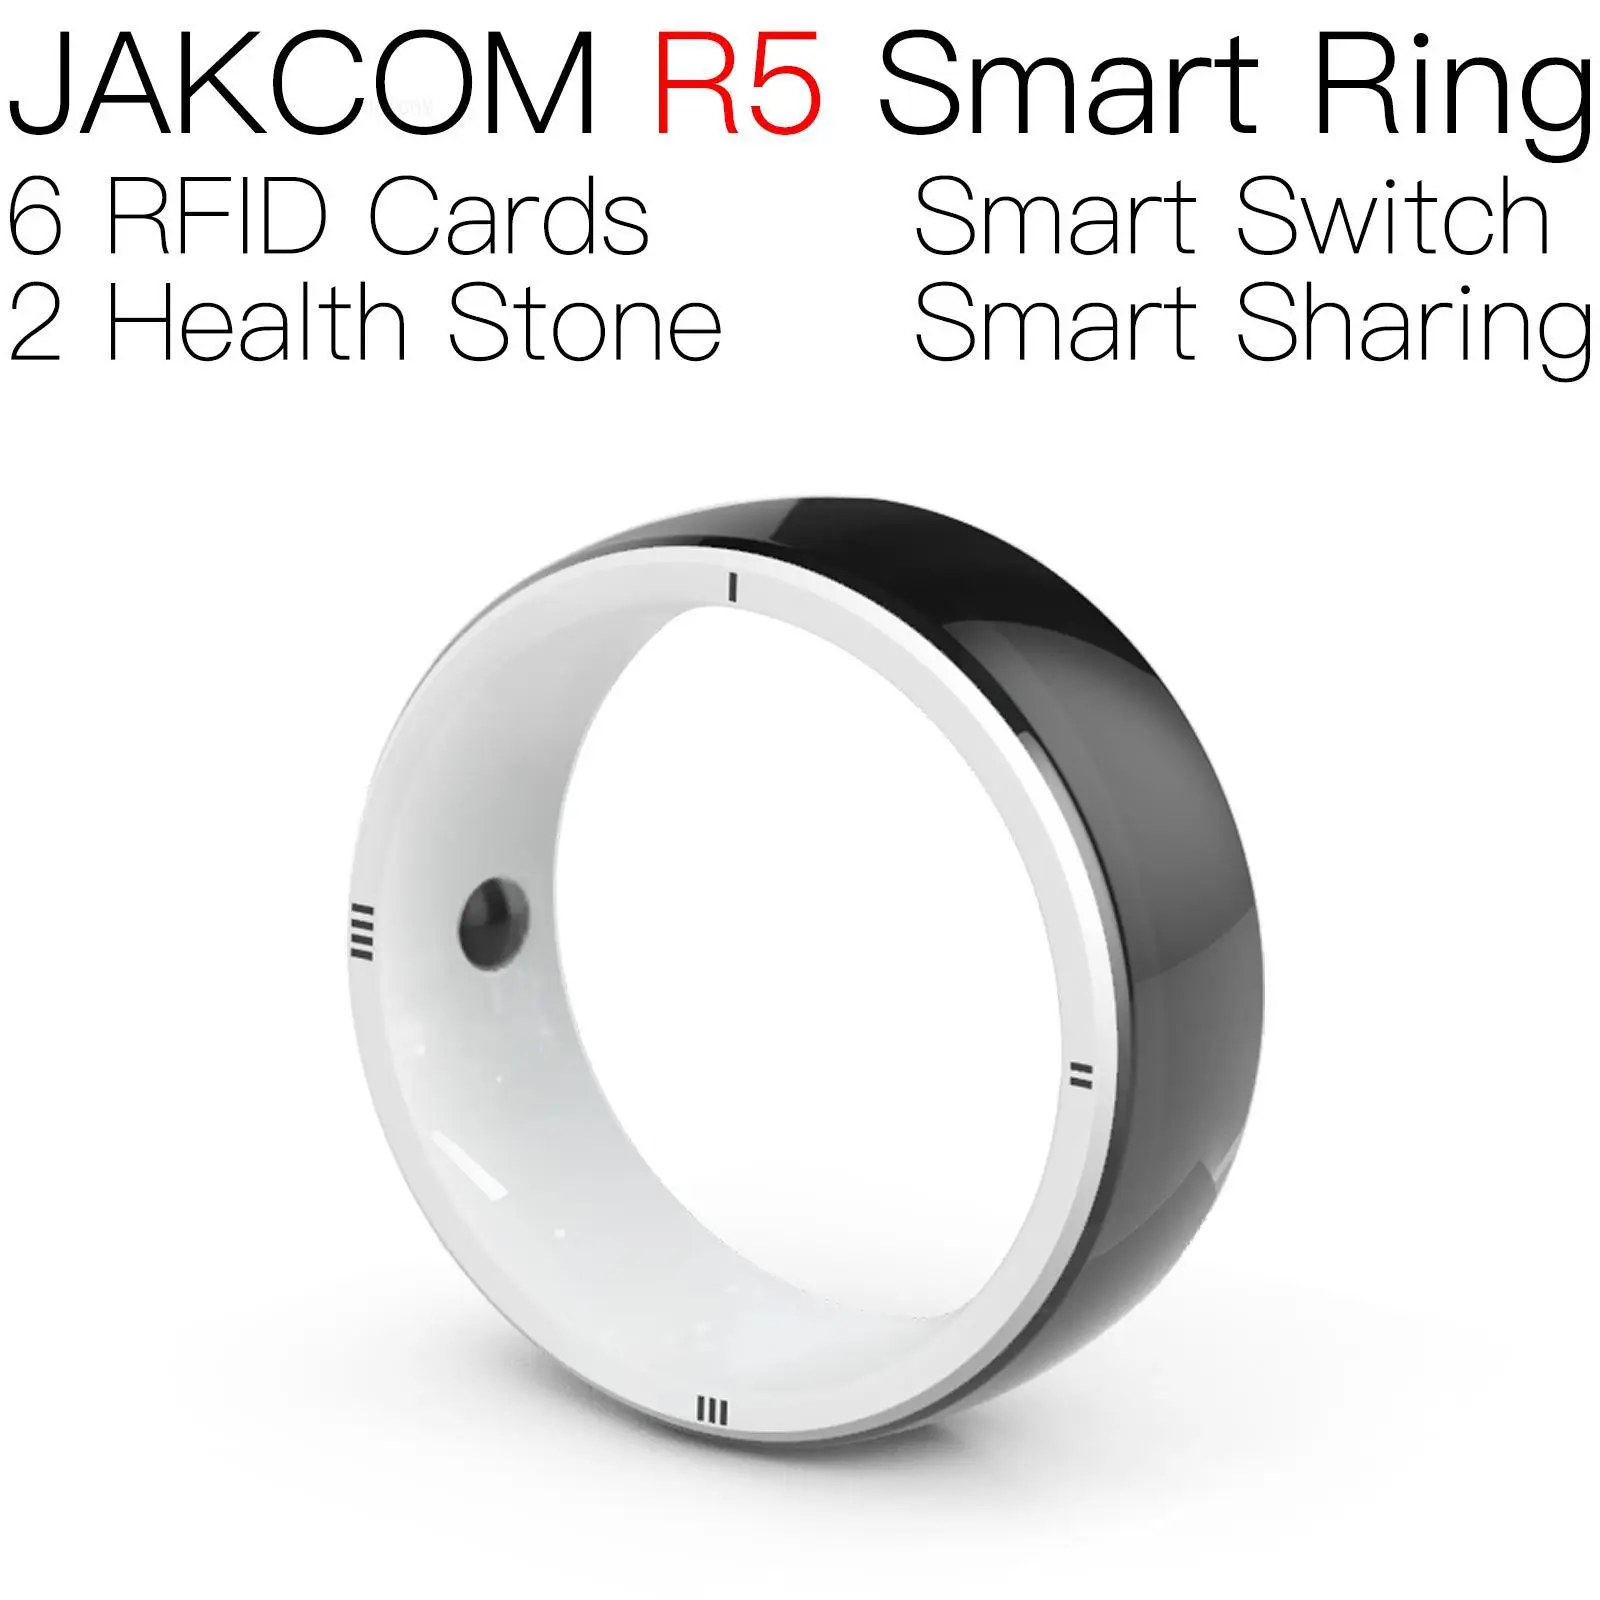 

JAKCOM R5 Smart Ring New arrival as uid card external number nfc thank you sticker temperature tag 215 metal rfid coffin mhz